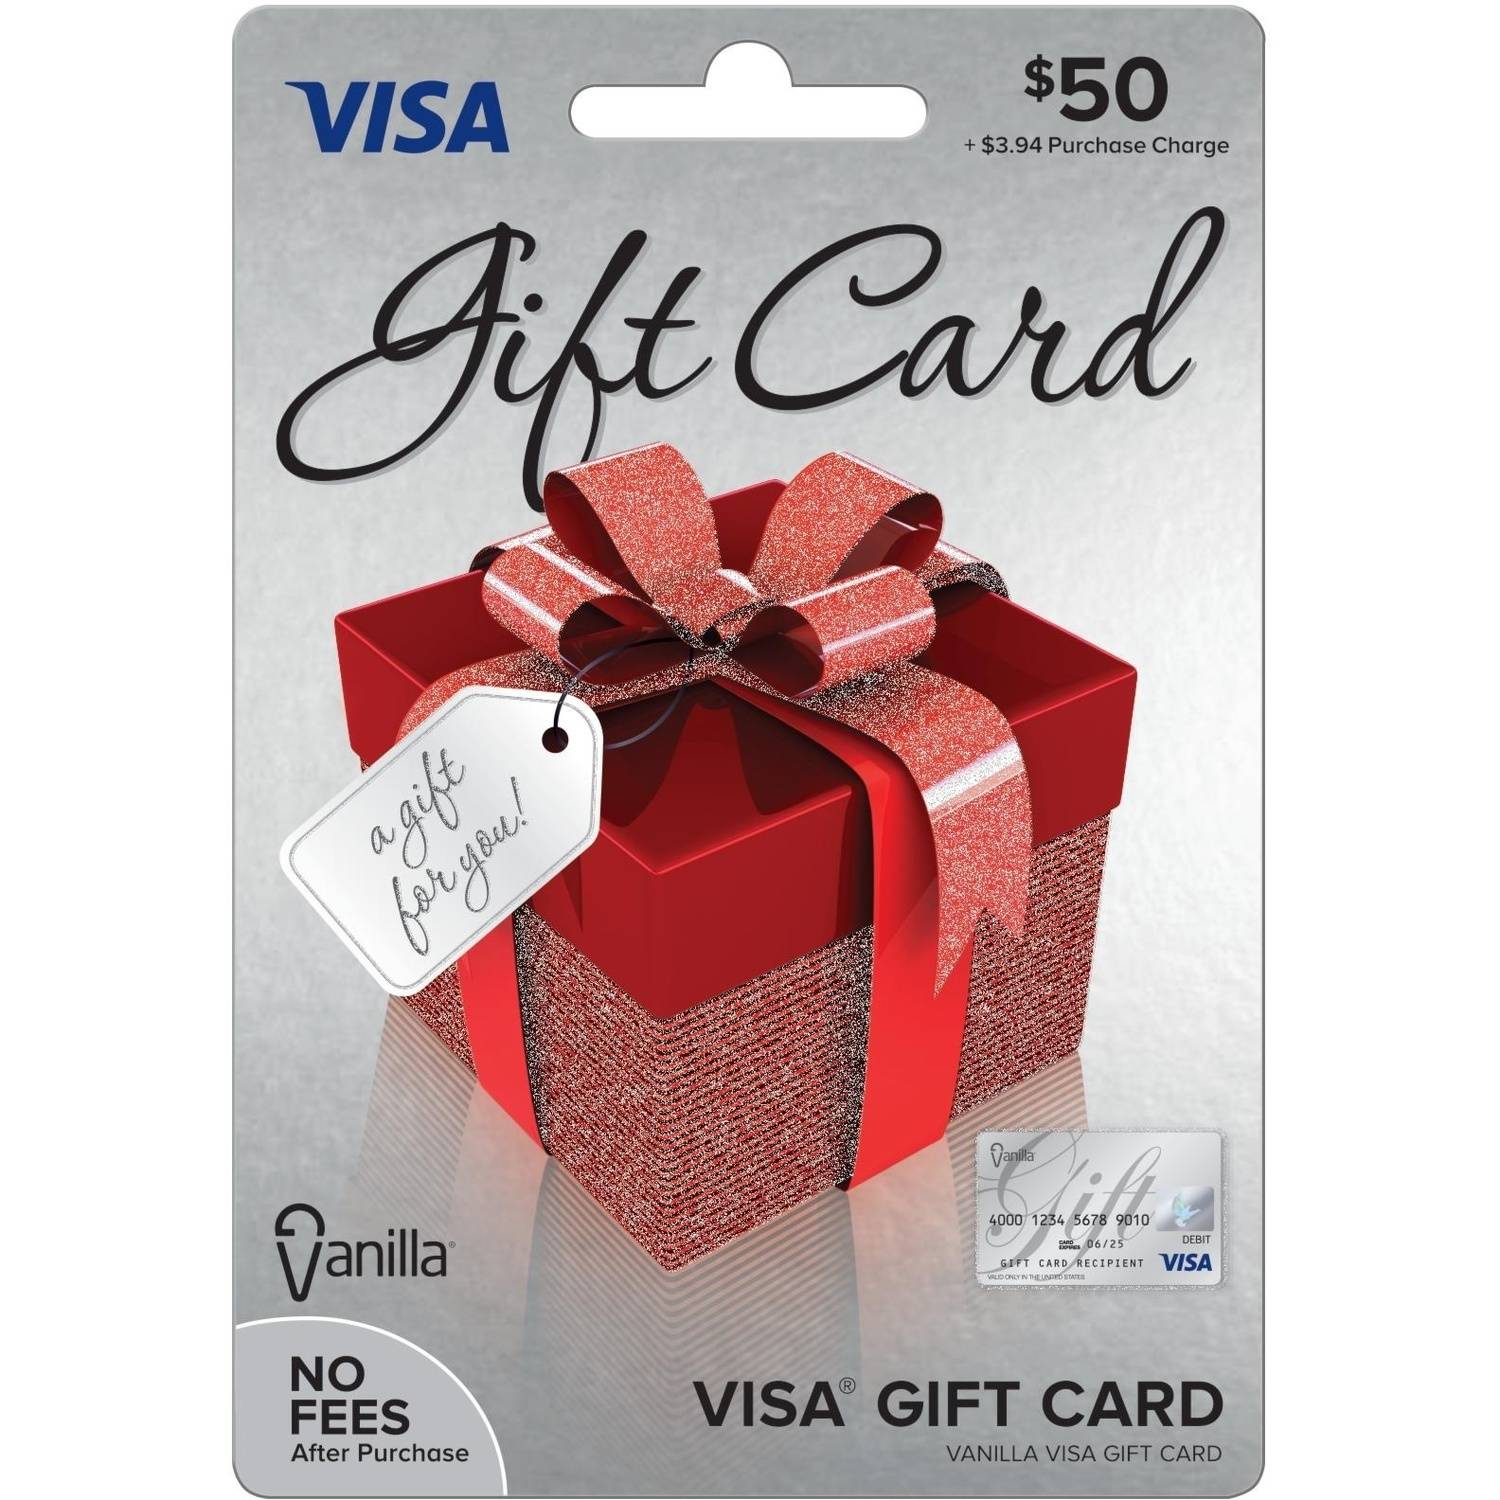 Vanilla gift card an option to offer to someone special